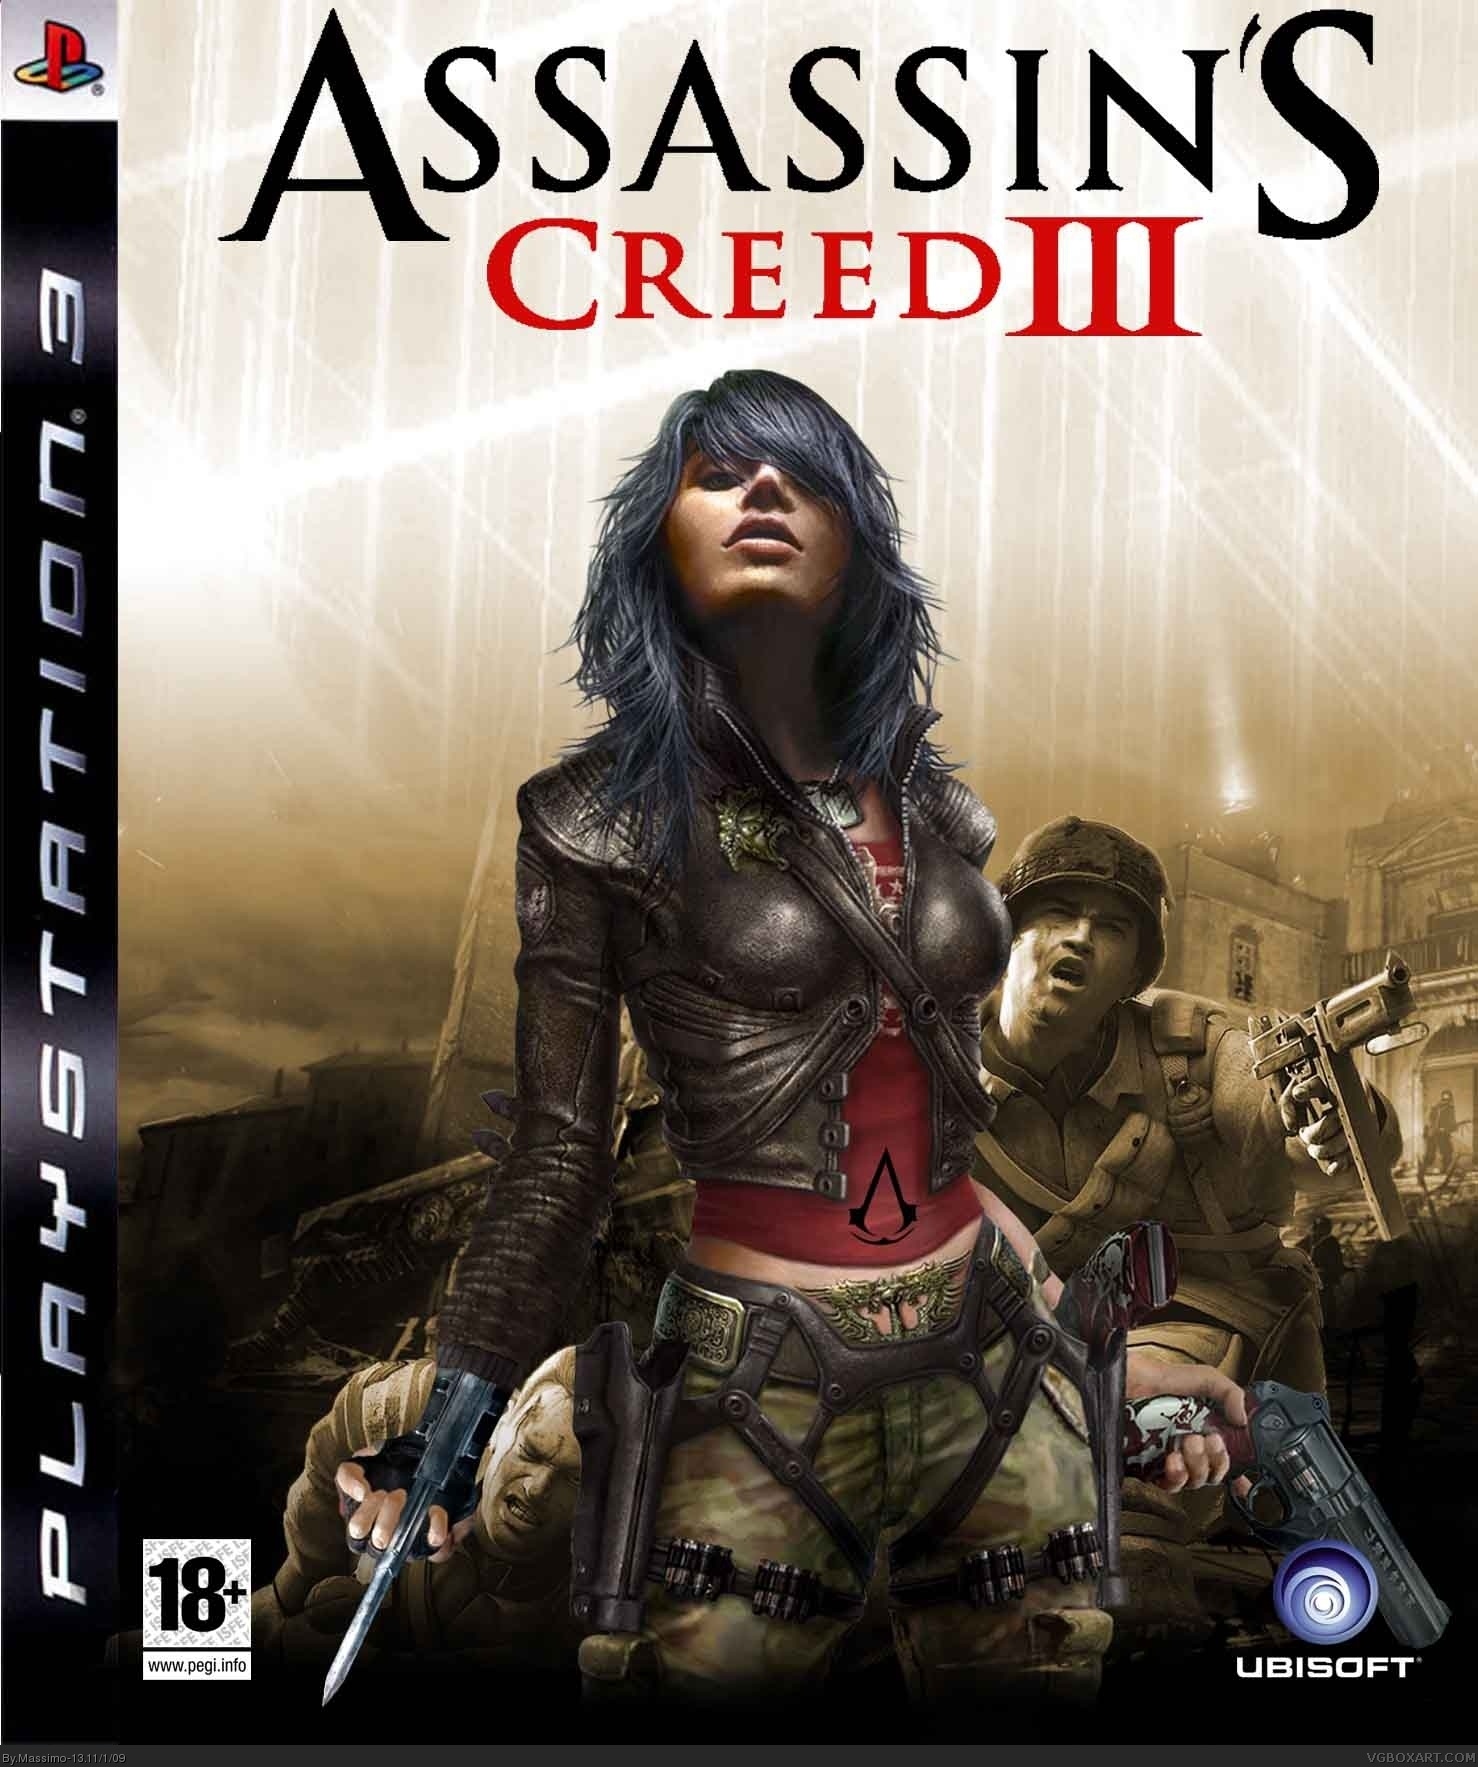 Assassins's creed III box cover